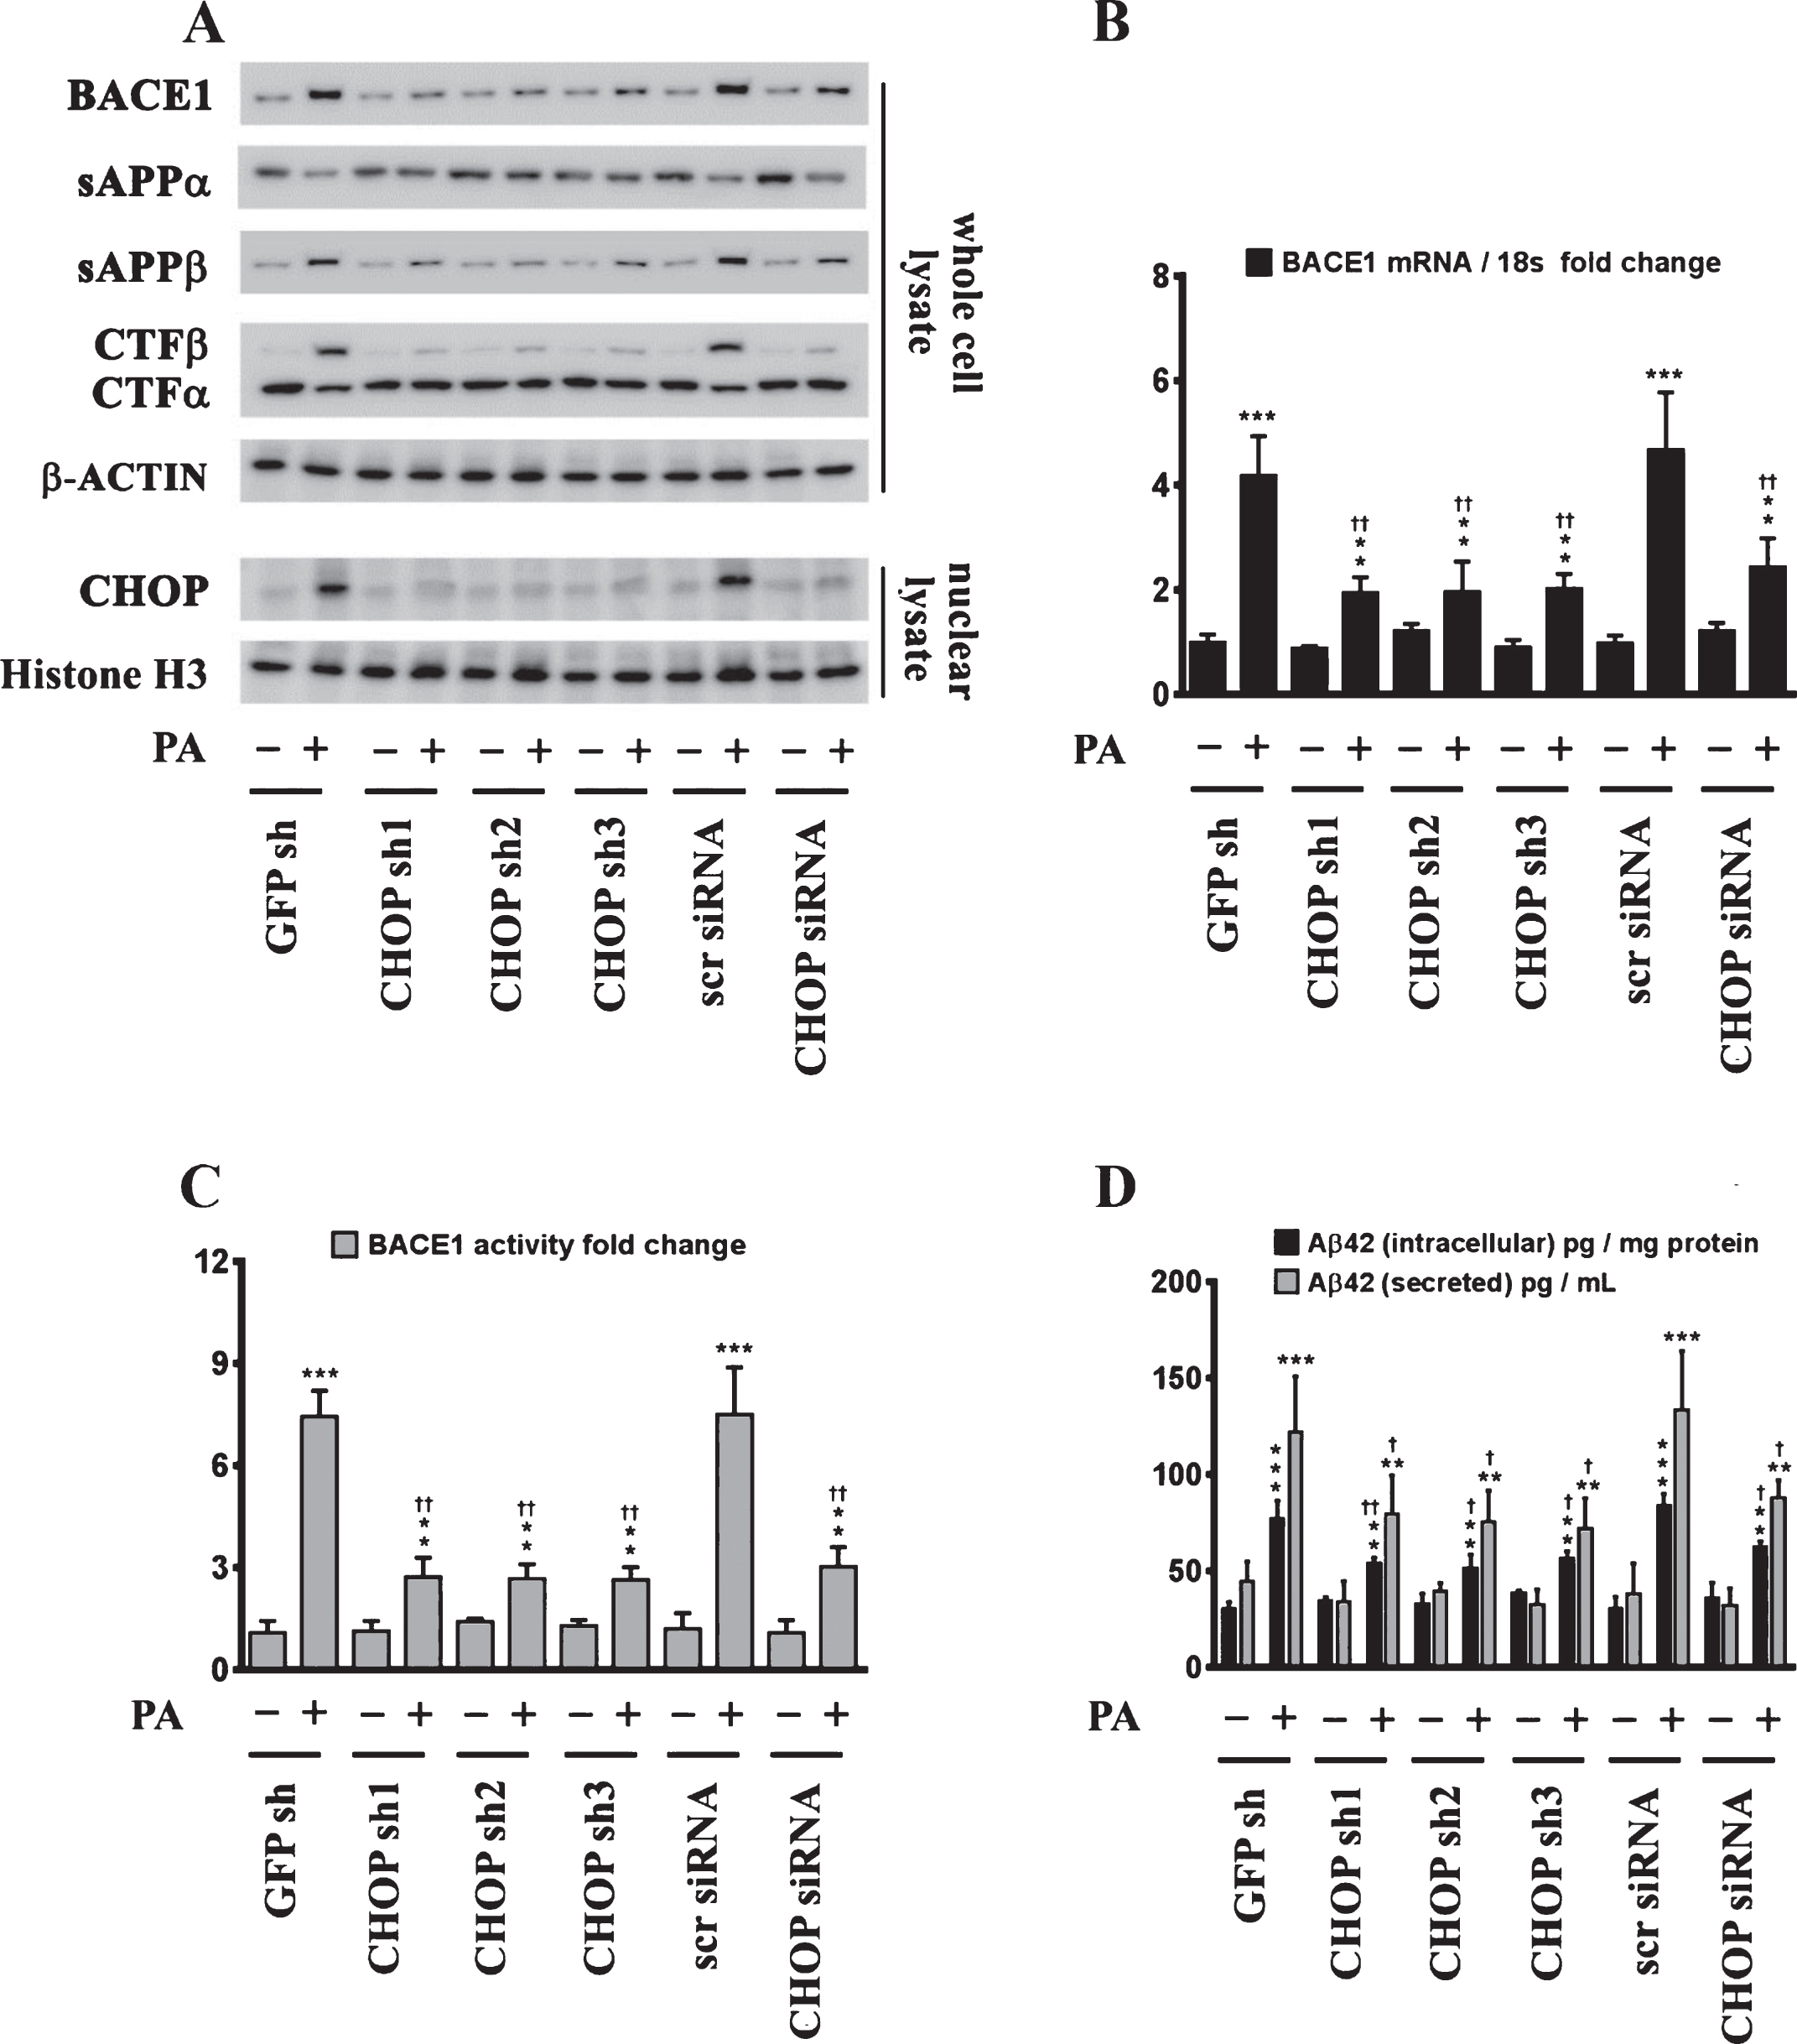 CHOP mediates the palmitate-induced increase in BACE1 expression and subsequent Aβ genesis. A) Representative western blots show that knocking-down CHOP expression using a RNAi approach significantly attenuates the palmitate-induced increase in BACE1 protein levels accompanied by a decrease in the amyloidogenic processing of AβPP as evidenced by a decrease in the palmitate-induced increase in sAβPPβ and CTFβ levels concomitant with an increase in the palmitate-induced decrease in sAβPPα and CTFα levels in the whole cell homogenates from SH-SY5Y-APPSwe cells. B, C) Knocking-down CHOP expression attenuates the palmitate-induced increase in BACE1 mRNA expression (B) and BACE1 activity (C) in SH-SY5Y-APPSwe cells. D) ELISA immunoassays show that knocking-down CHOP expression significantly mitigates the exogenous palmitate treatment-induced increase in the levels of the intracellular Aβ1 - 42 species in the whole cell lysates and secreted Aβ1 - 42 species in the conditioned media, from SH-SY5Y-APPSwe cells. Data is expressed as Mean±S.D and includes determination made in four (n = 4) separate cell culture experiments. **p < 0.01, ***p < 0.001 versus BSA-treated GFP knock-down cells or BSA-treated scrambled siRNA transfected cells; †p < 0.05, ††p < 0.01, versus palmitate-treated GFP knock-down cells or palmitate-treated scrambled siRNA transfected cells. PA, palmitic acid.